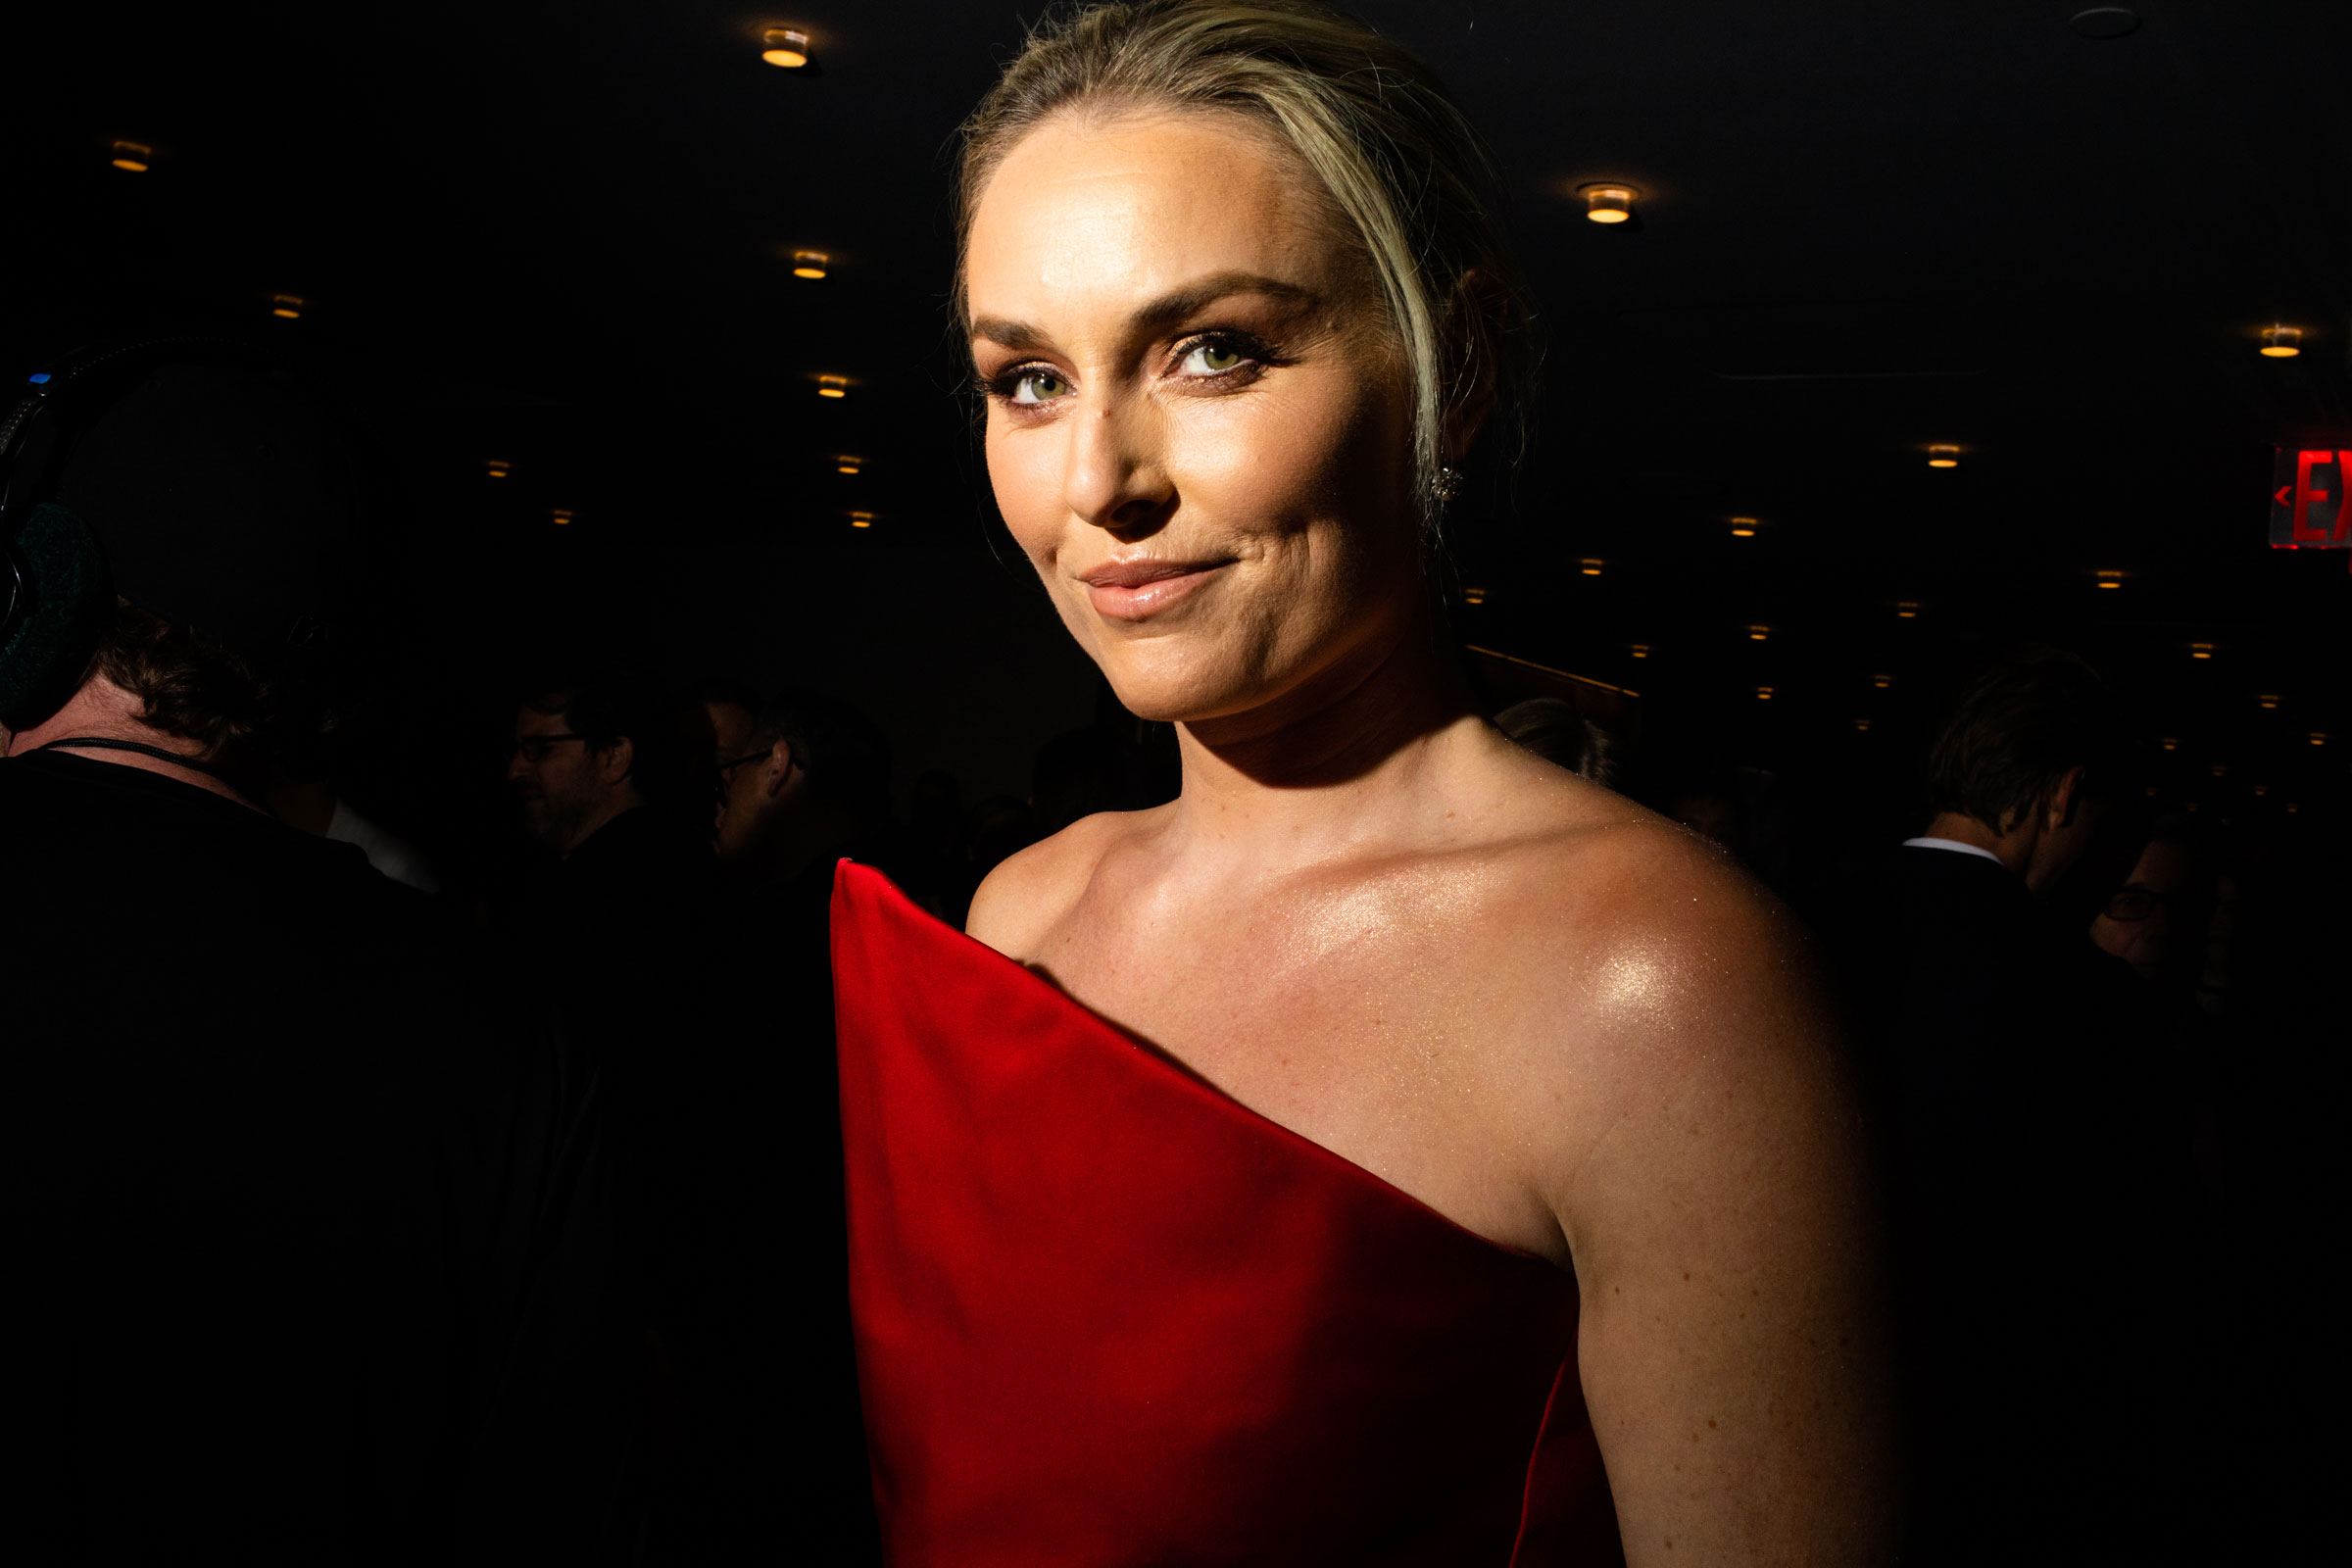 Olympic alpine skier Lindsey Vonn attends the TIME 100 Gala at Jazz at Lincoln Center in New York City, on April 26, 2023. (Landon Nordeman for TIME)